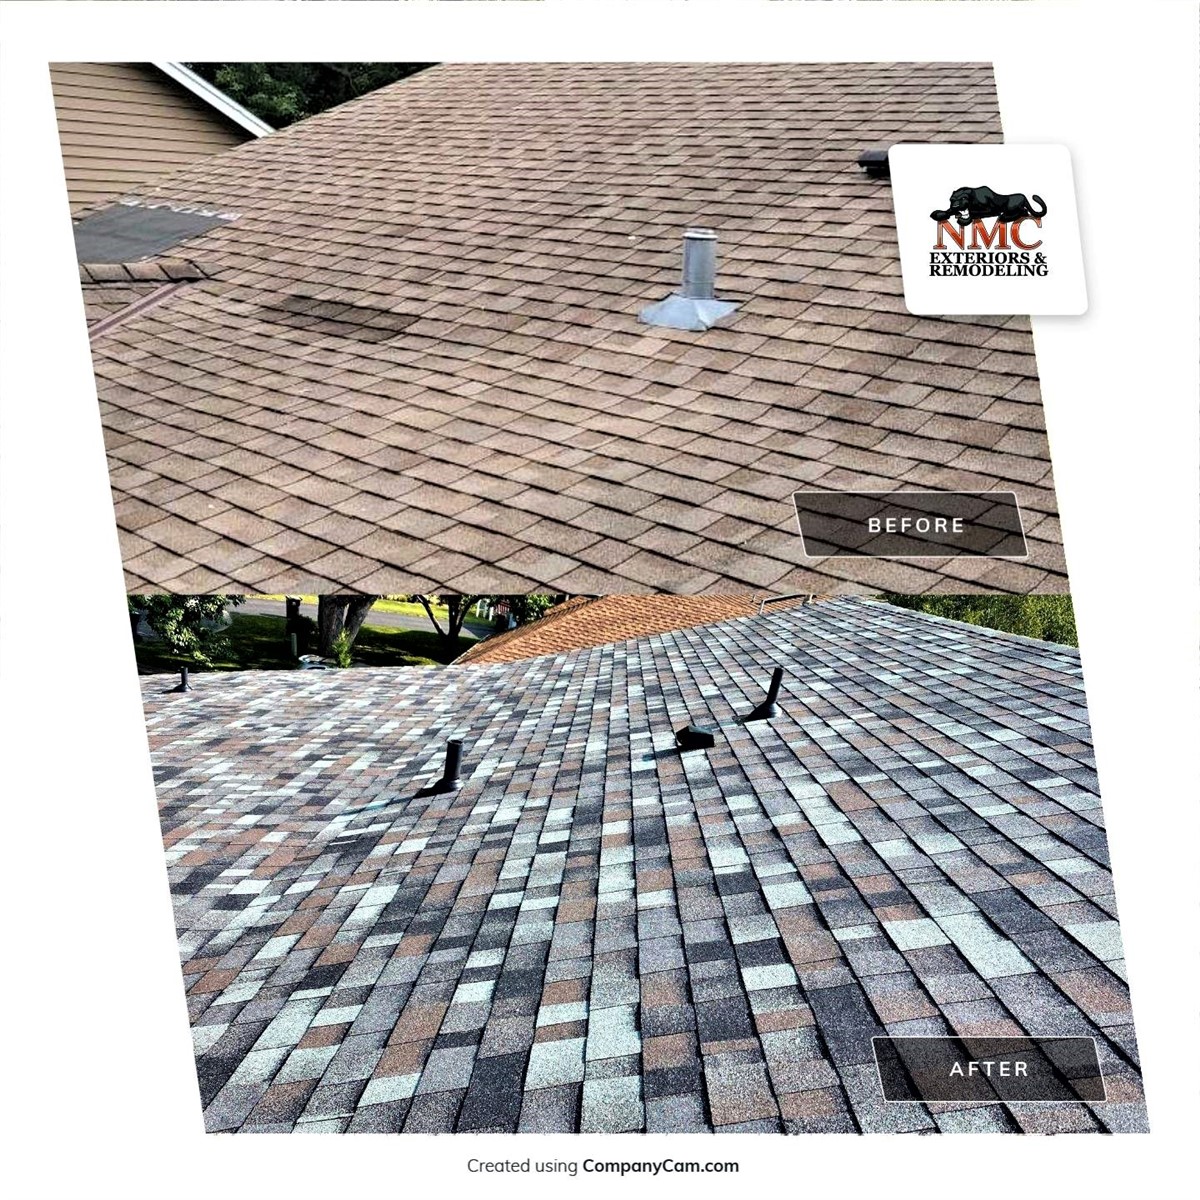 Insurance Claims Project; Hail Damaged Roof Replacement in Eden Prairie, MN